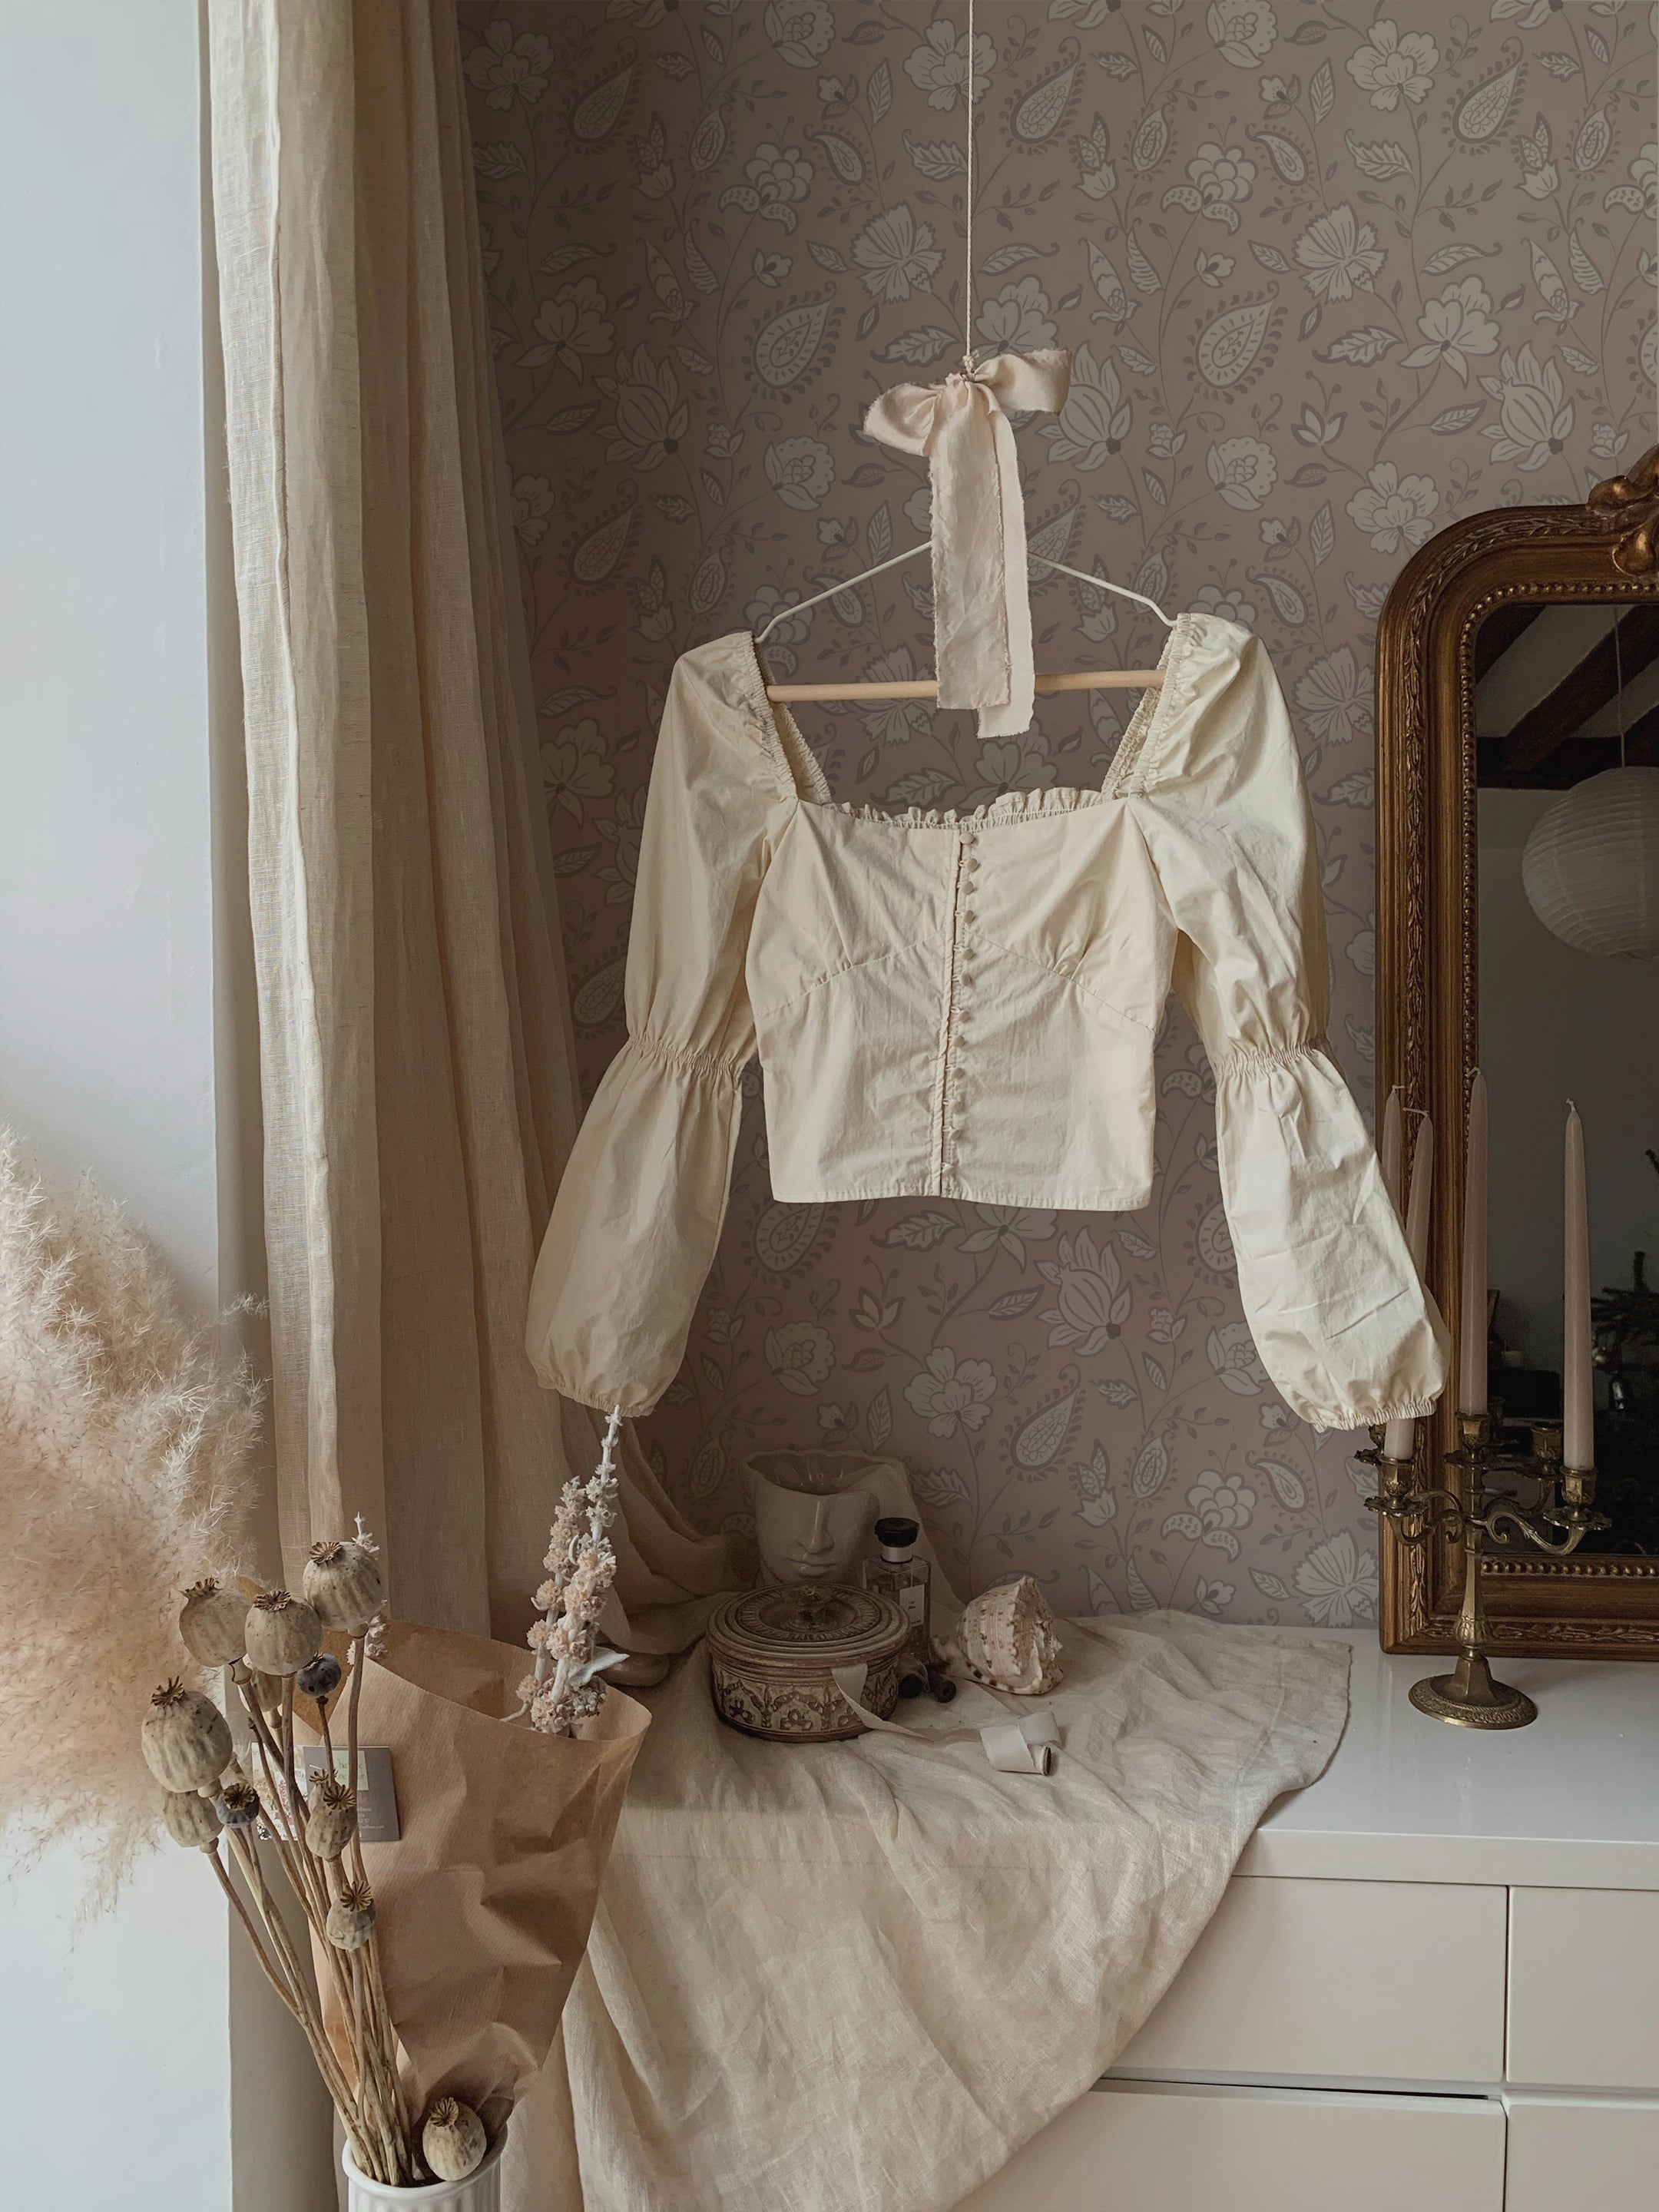 A romantic and rustic styling area featuring a vintage cream blouse hanging on a wooden hanger against a wall covered in soft lavender floral wallpaper. The setting includes dried flowers, decorative objects, and a draped linen fabric, creating an elegant vintage ambiance.